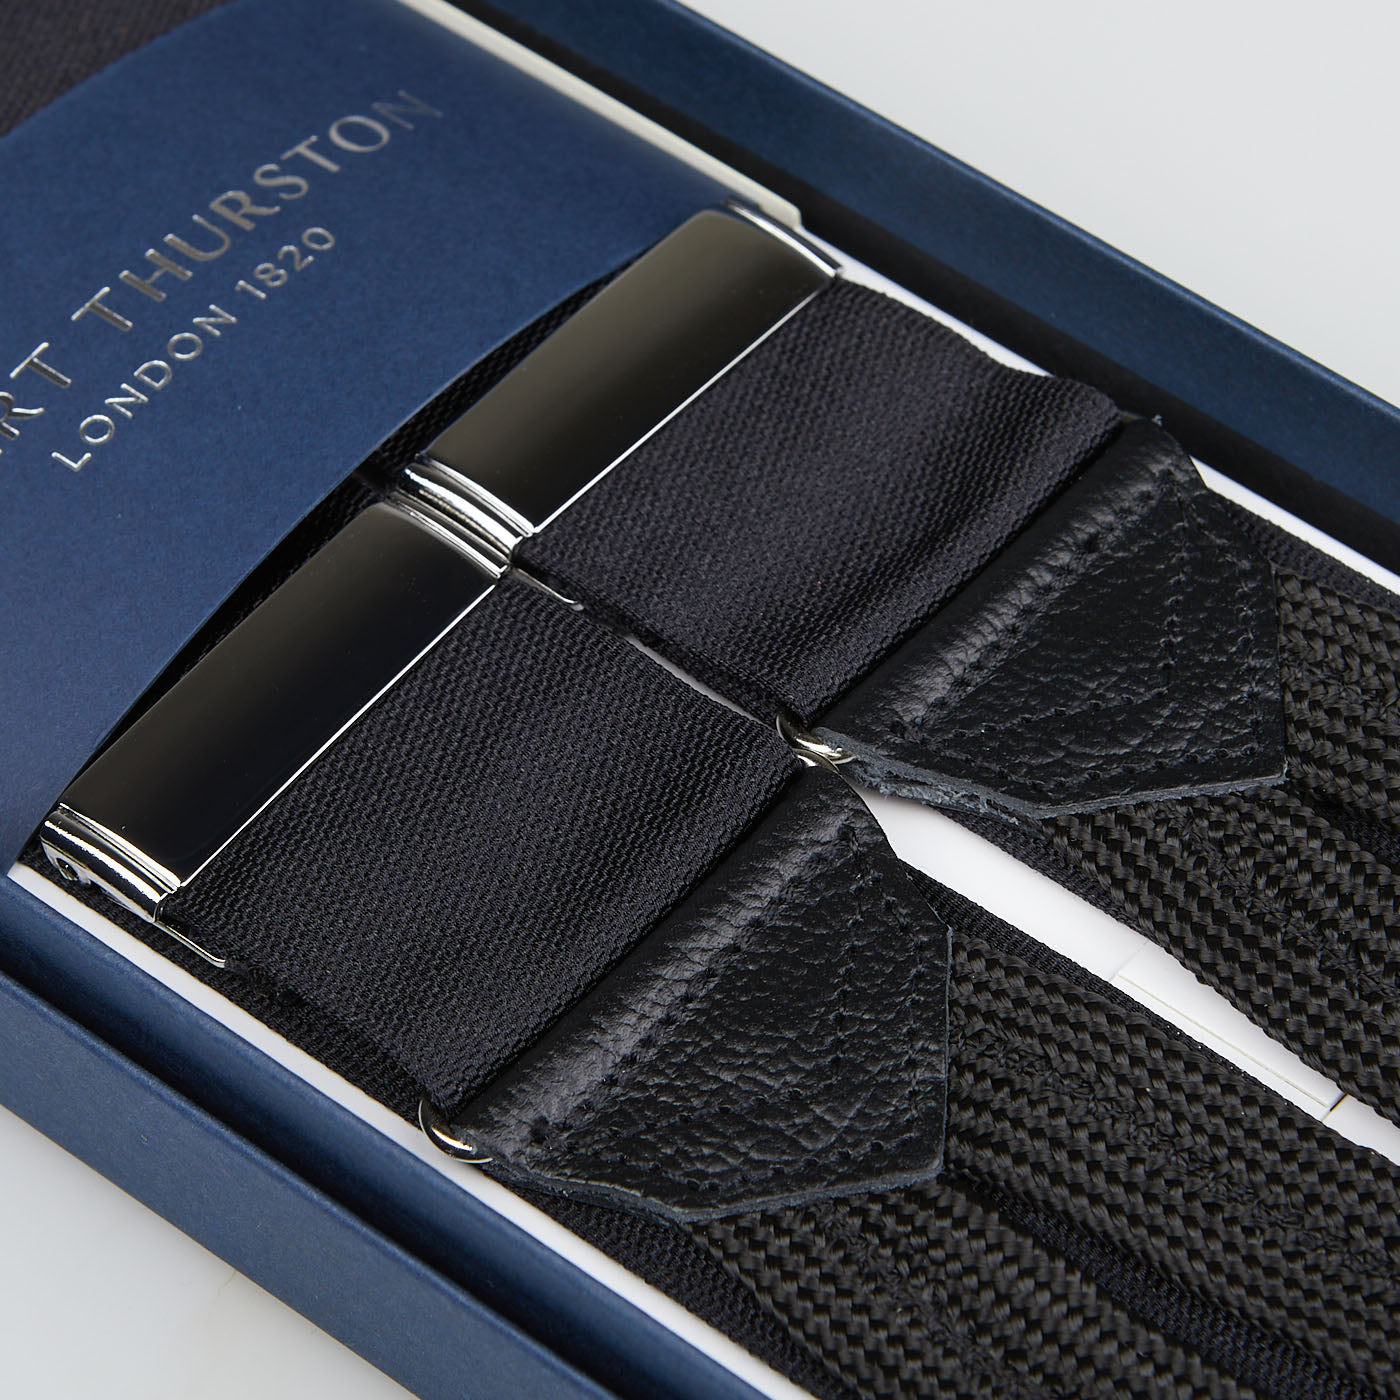 Black Nylon Leather 40mm Braces with silver clips, crafted by British craftsmen, displayed in an open blue box labeled "Albert Thurston London 1820.